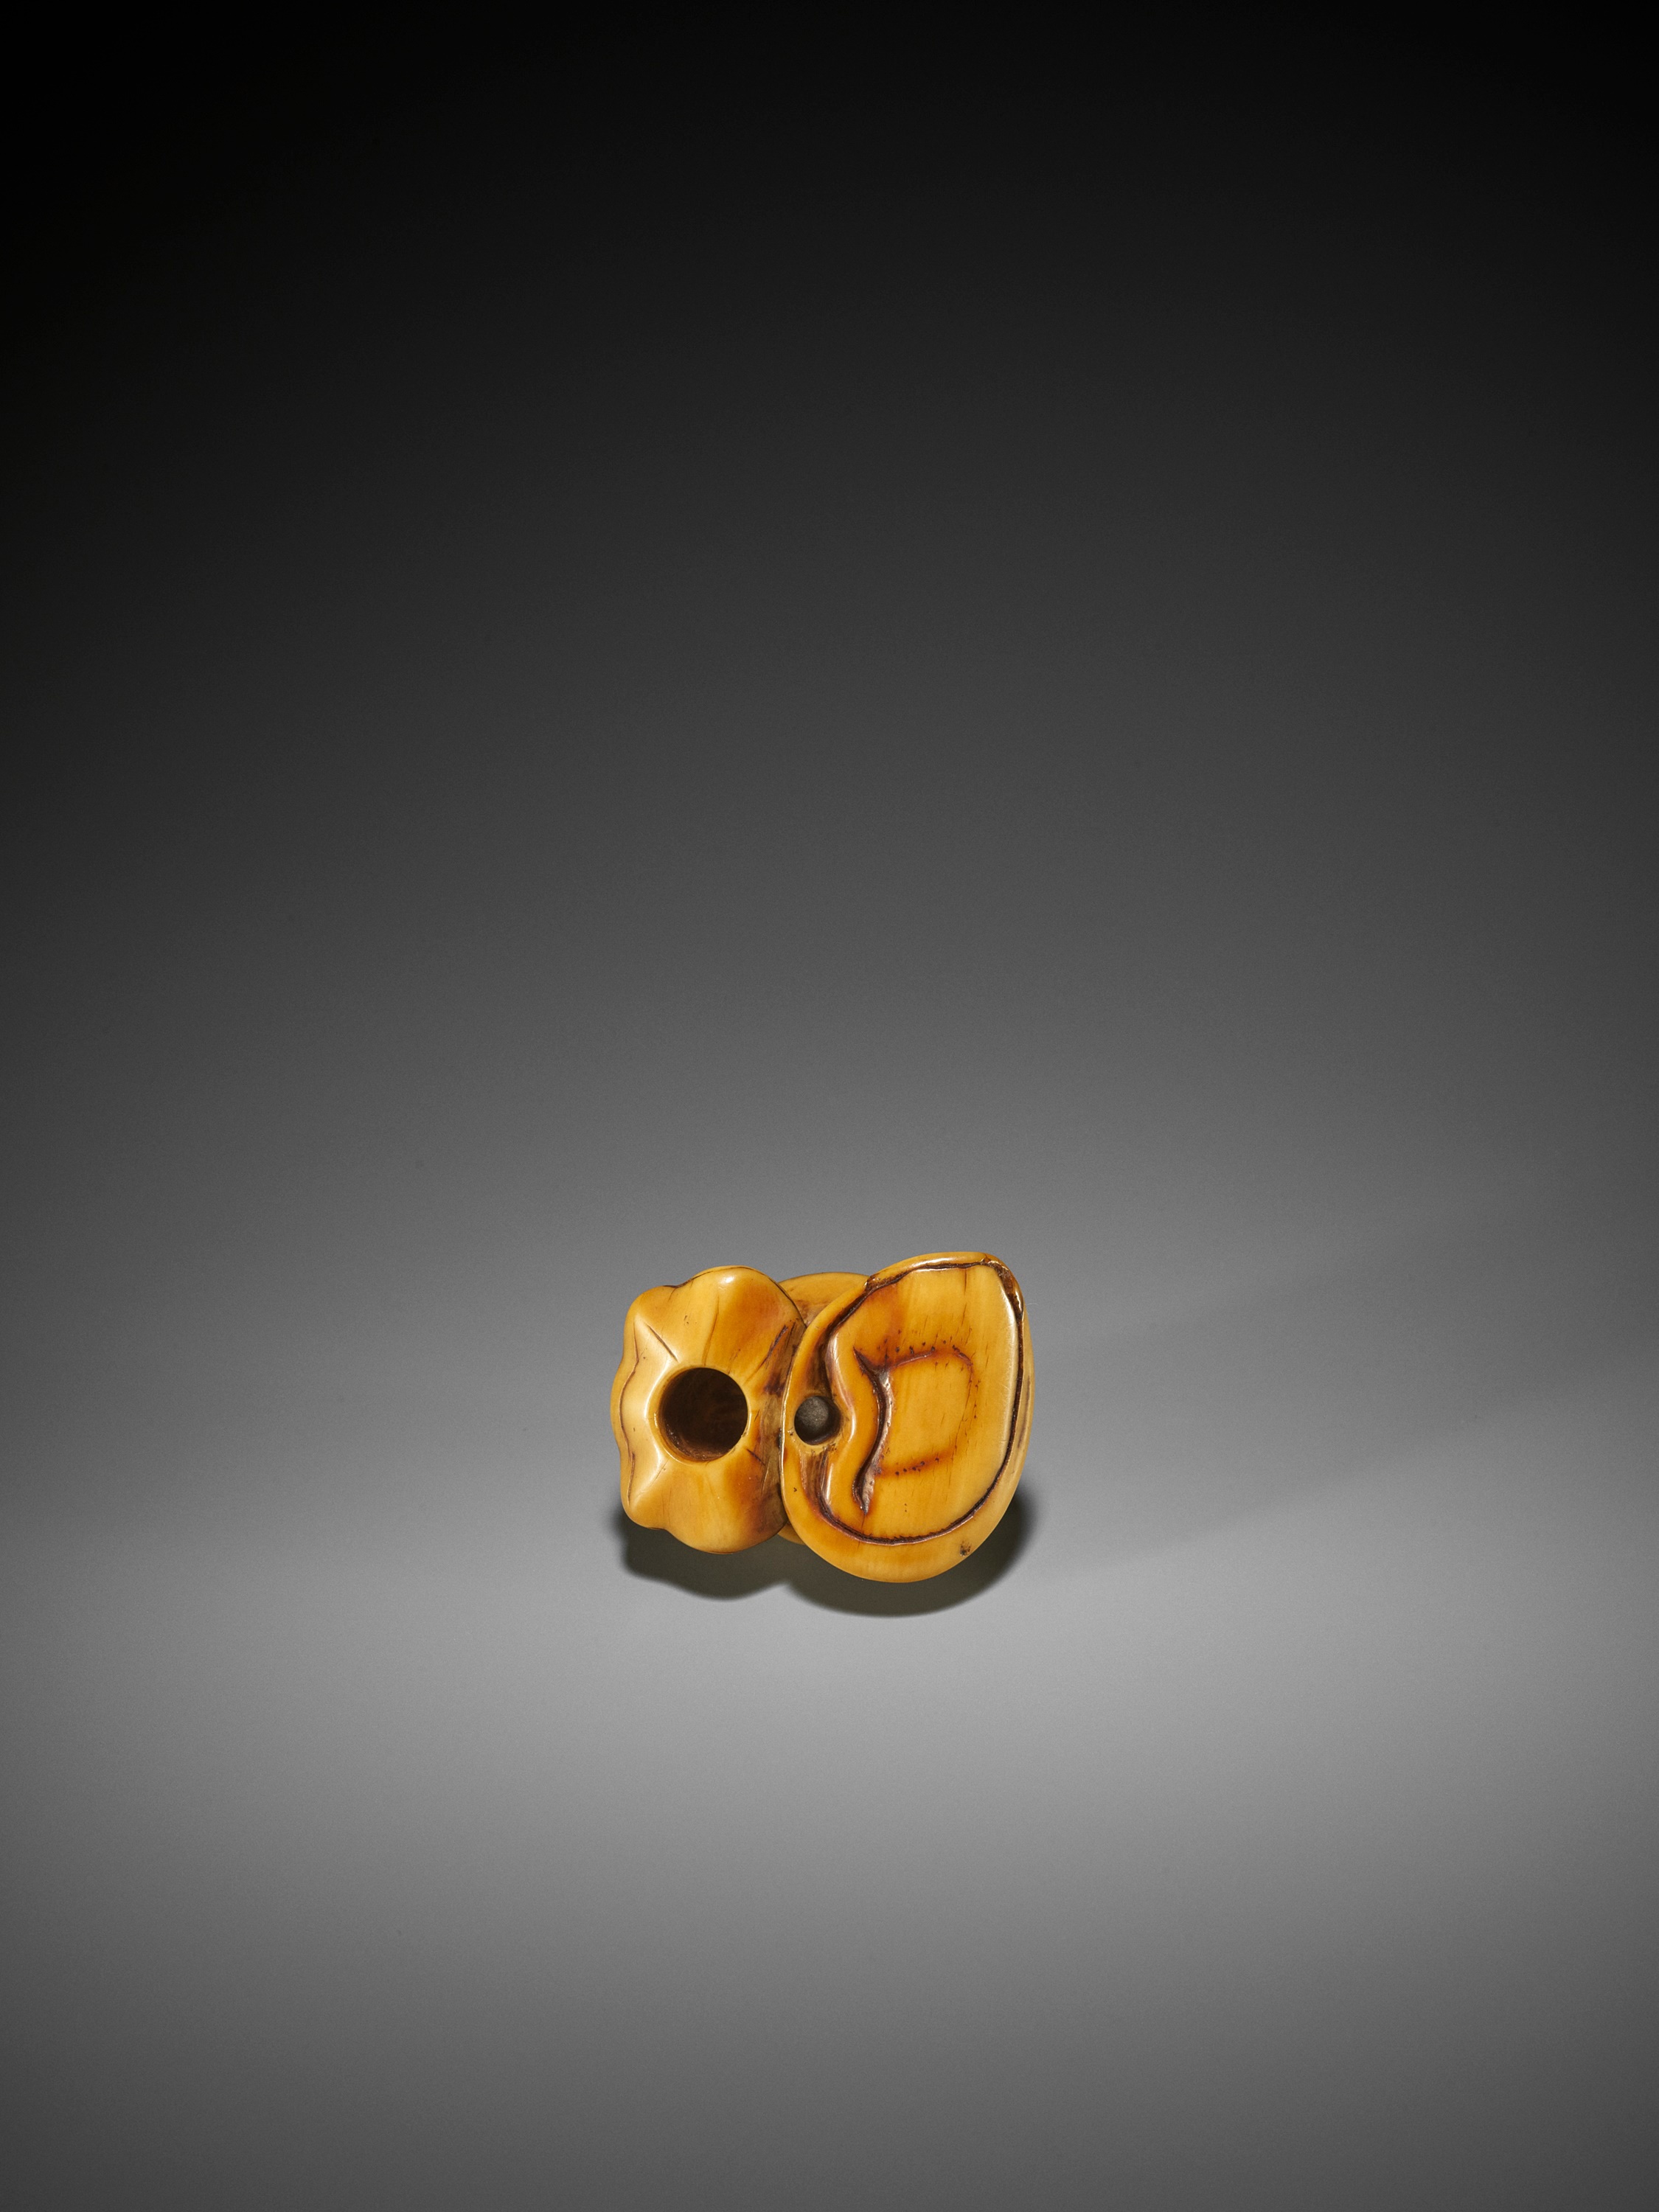 AN EARLY IVORY NETSUKE OF A HERMIT CRAB AND SHELLS - Image 8 of 8